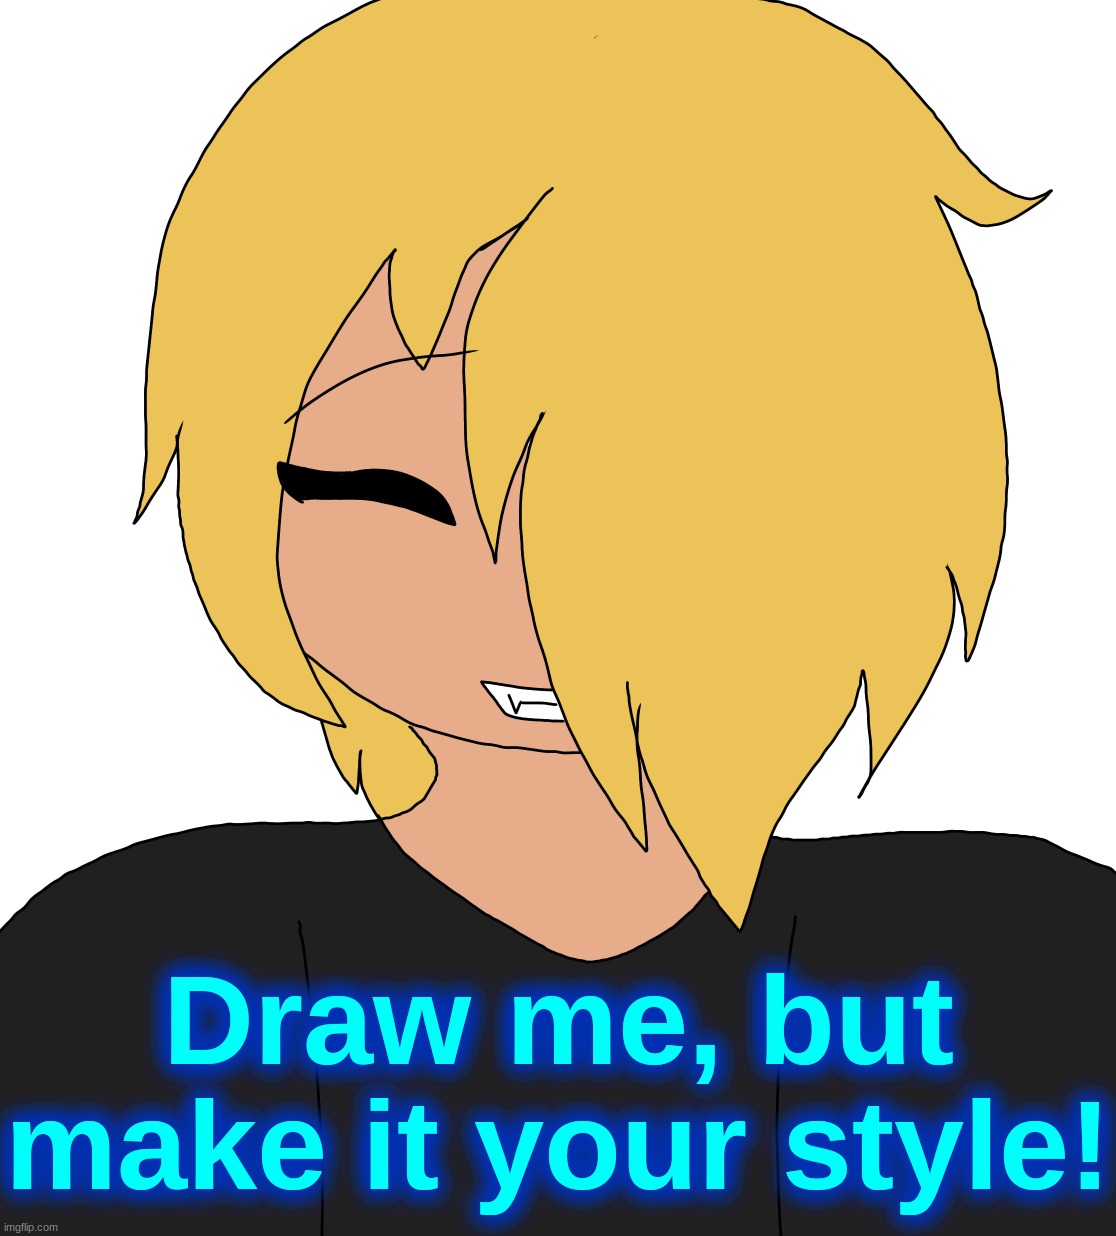 Spire smiling | Draw me, but make it your style! | image tagged in spire smiling | made w/ Imgflip meme maker